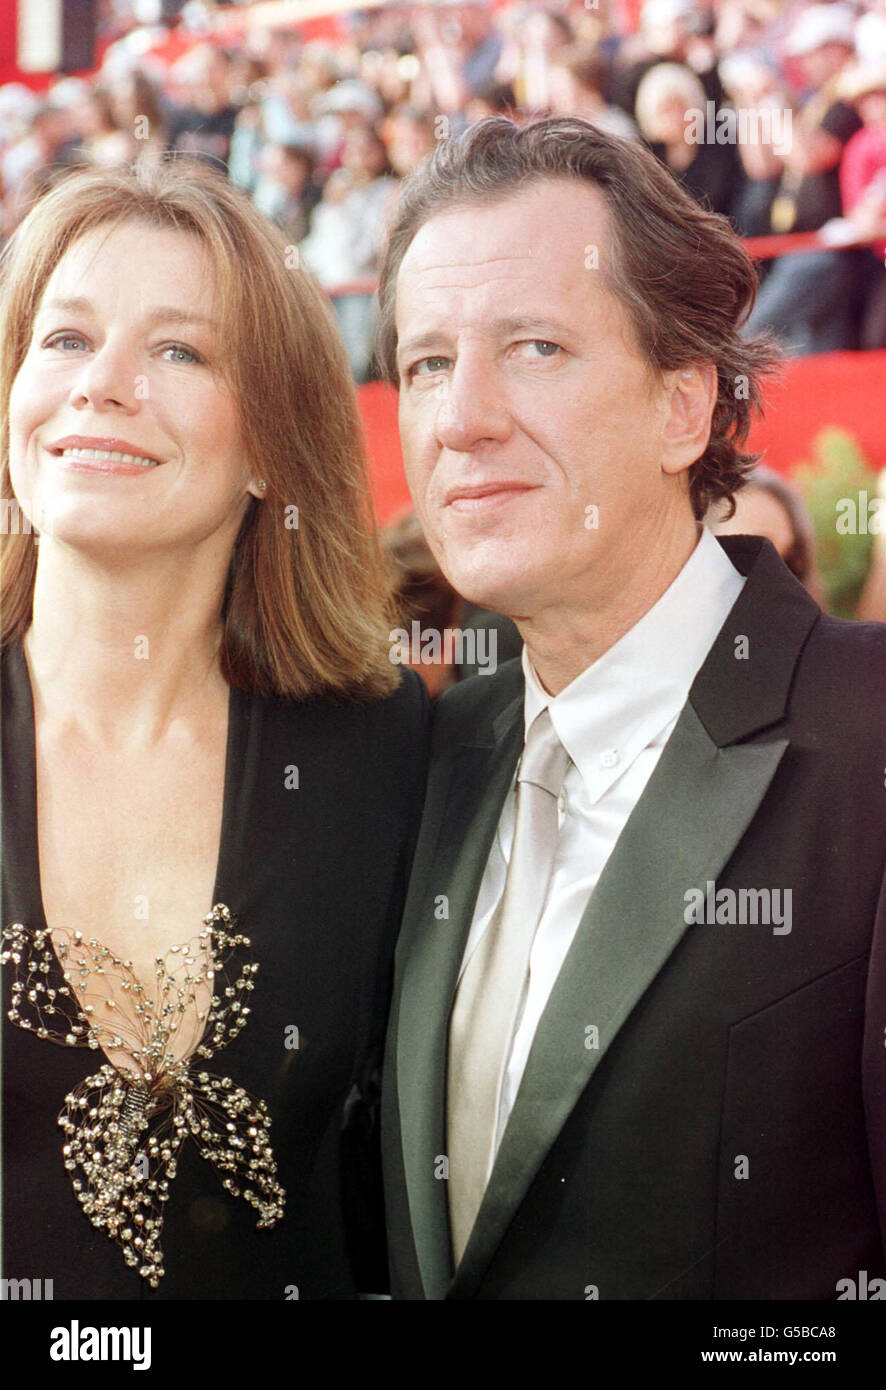 australian Actor Geoffrey Rush Arriving For The 73rd Annual Academy Awards The Oscars At The Shrine Auditorium In Los Angeles Usa Stock Photo  Alamy